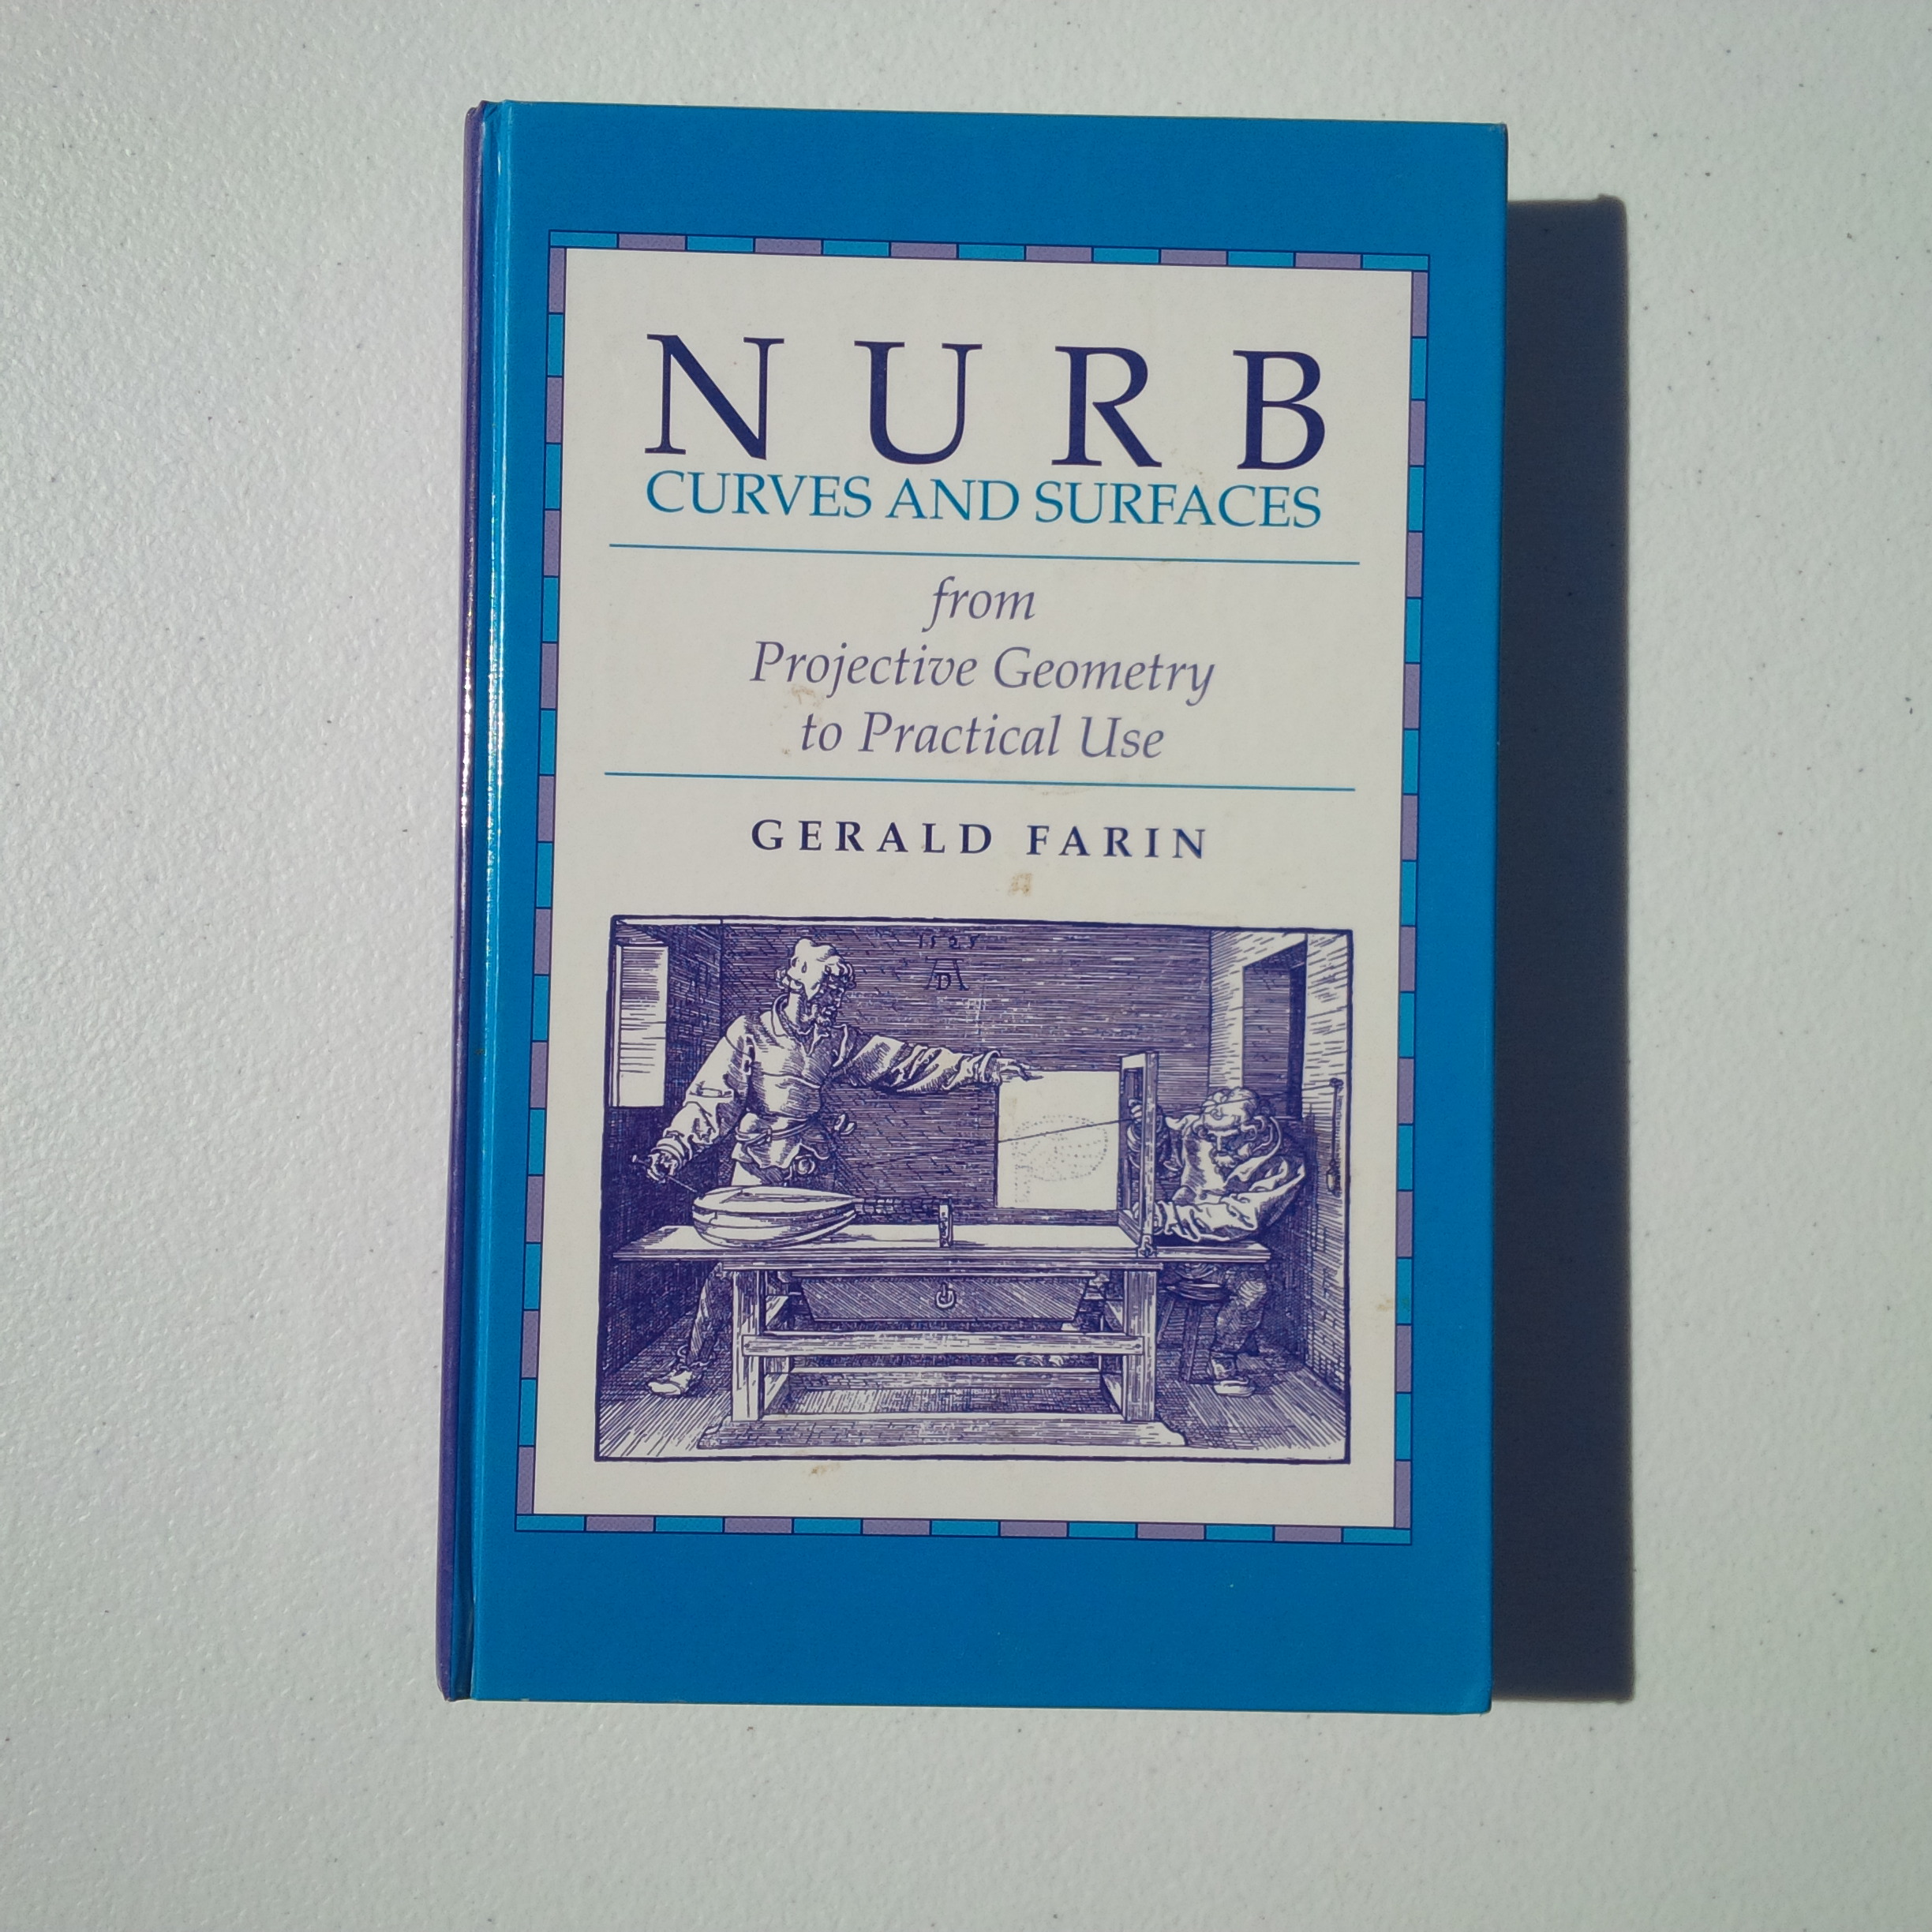 Used  1994 Farin ISBN 1-56881-038-5 NURB Curves and Surfa...